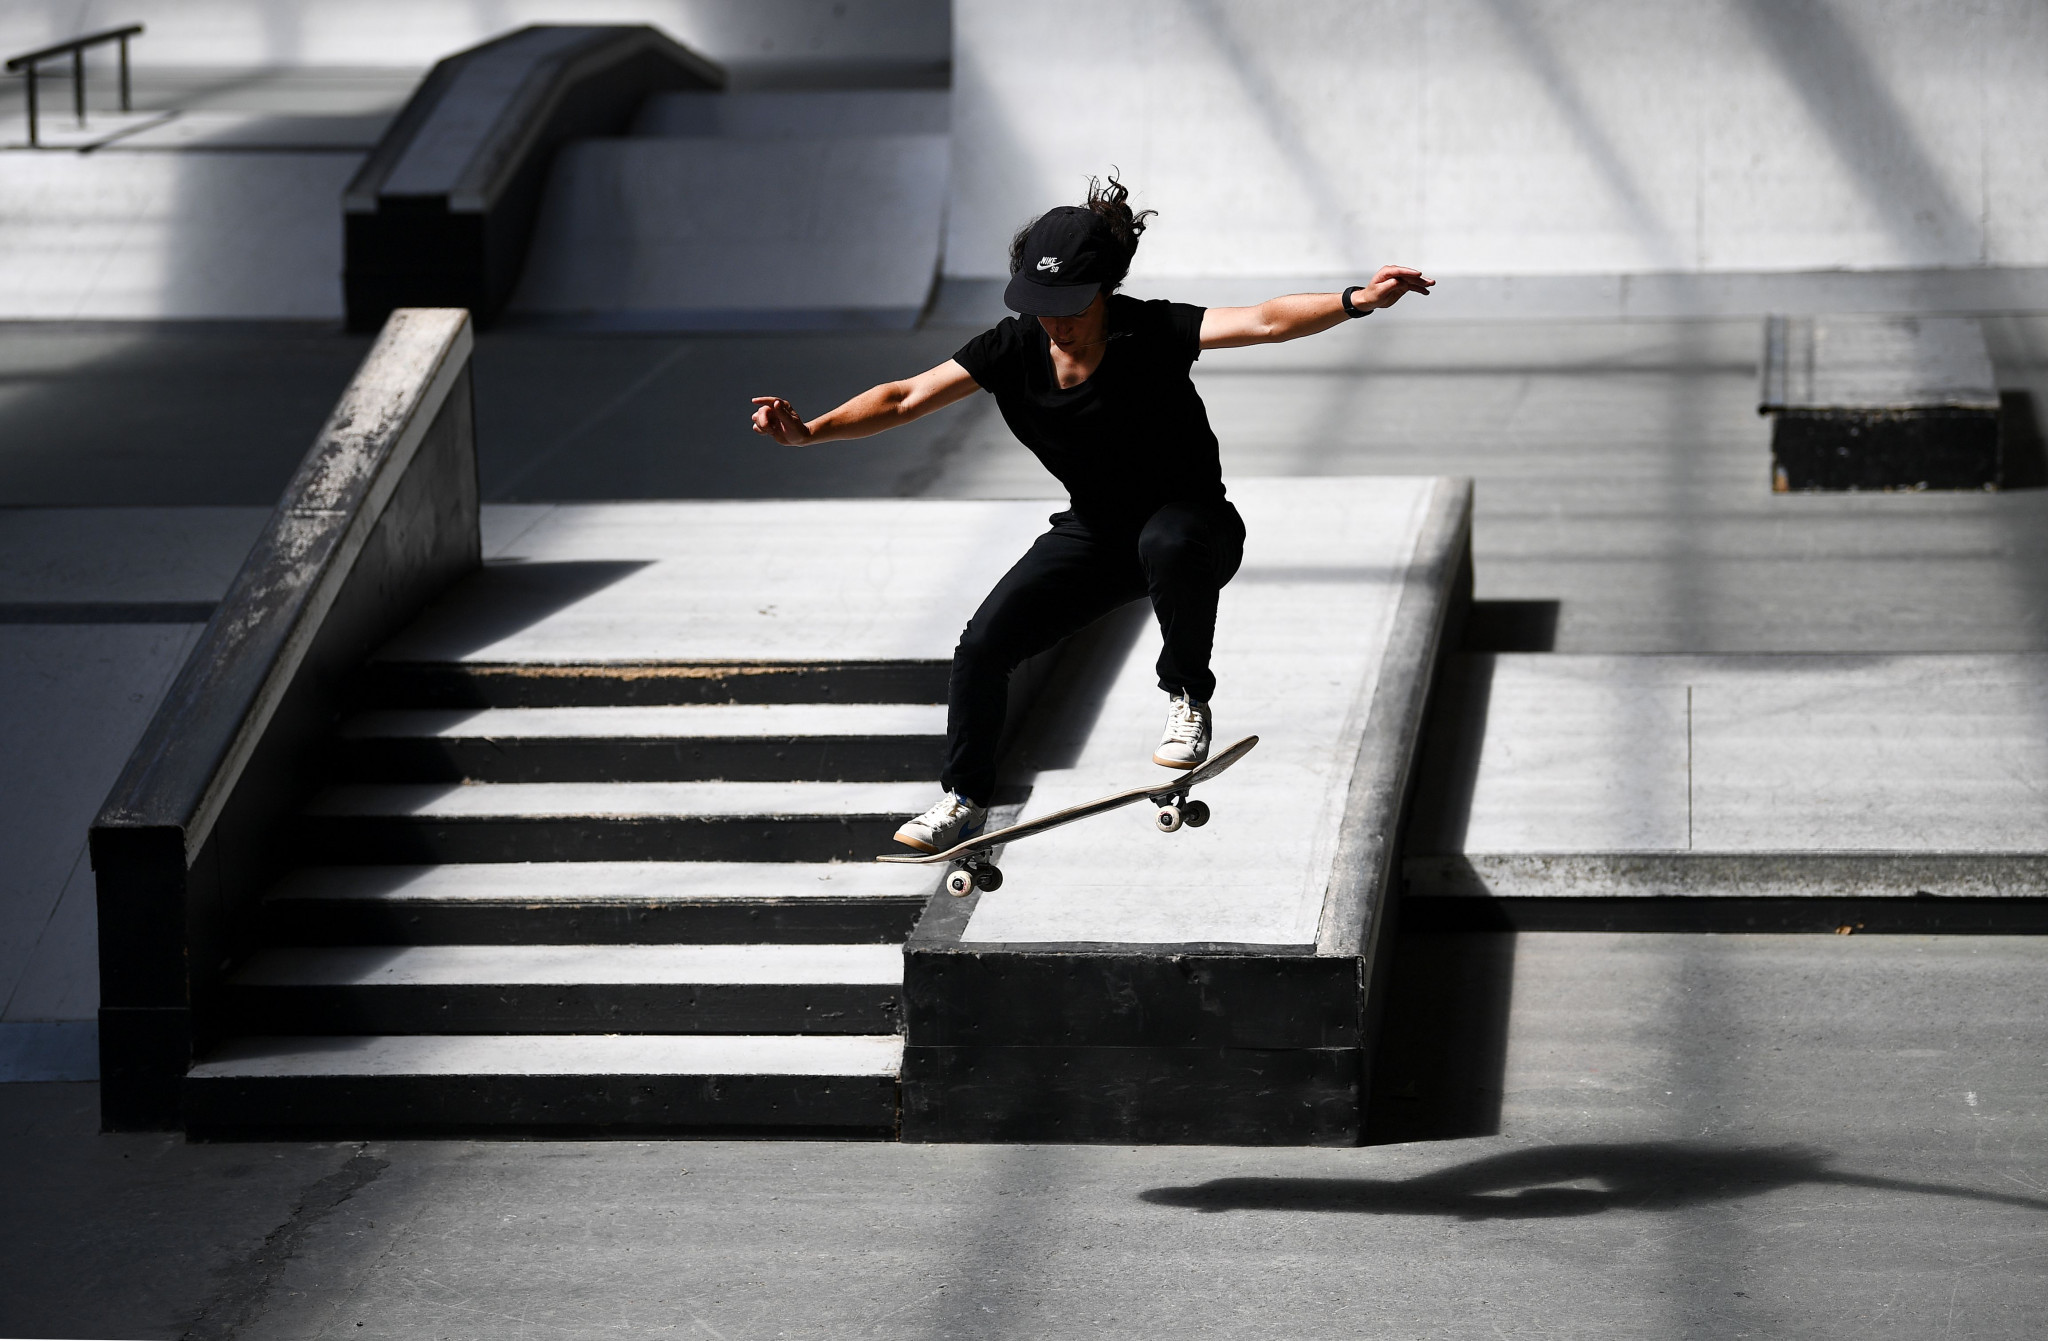 Skateboarding is due to make its Olympic debut this year ©Getty Images